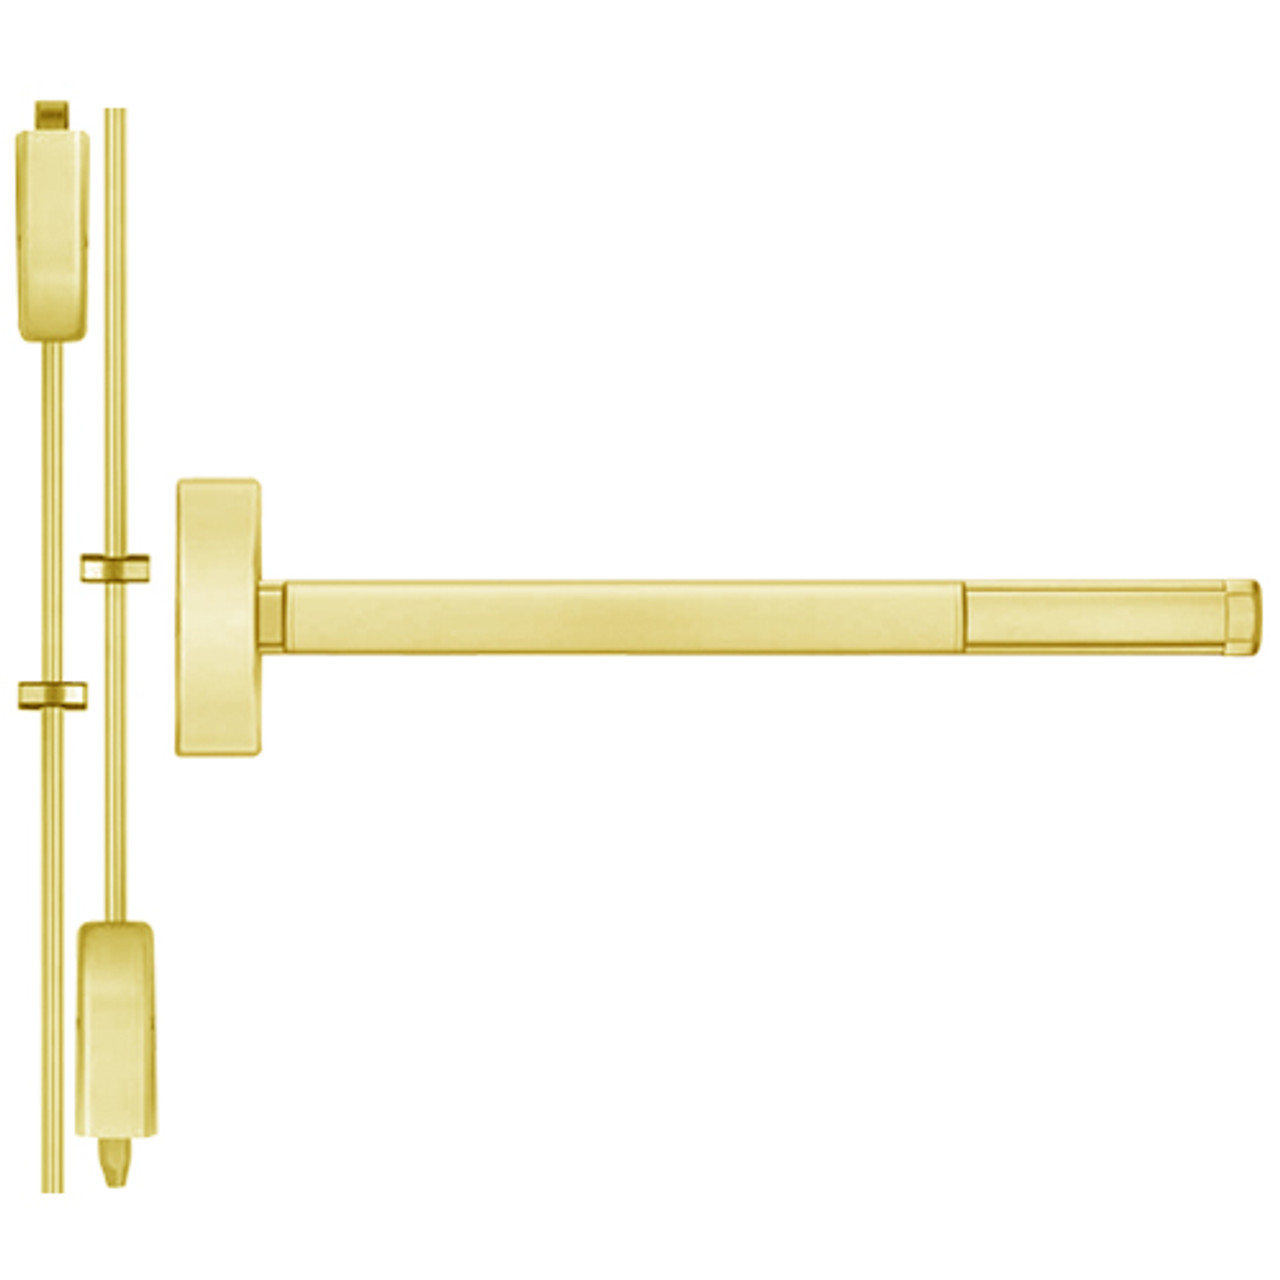 DEFL2201-605-36 PHI 2200 Series Fire Rated Apex Surface Vertical Rod Device with Delayed Egress Prepped for Cover Plate in Bright Brass Finish